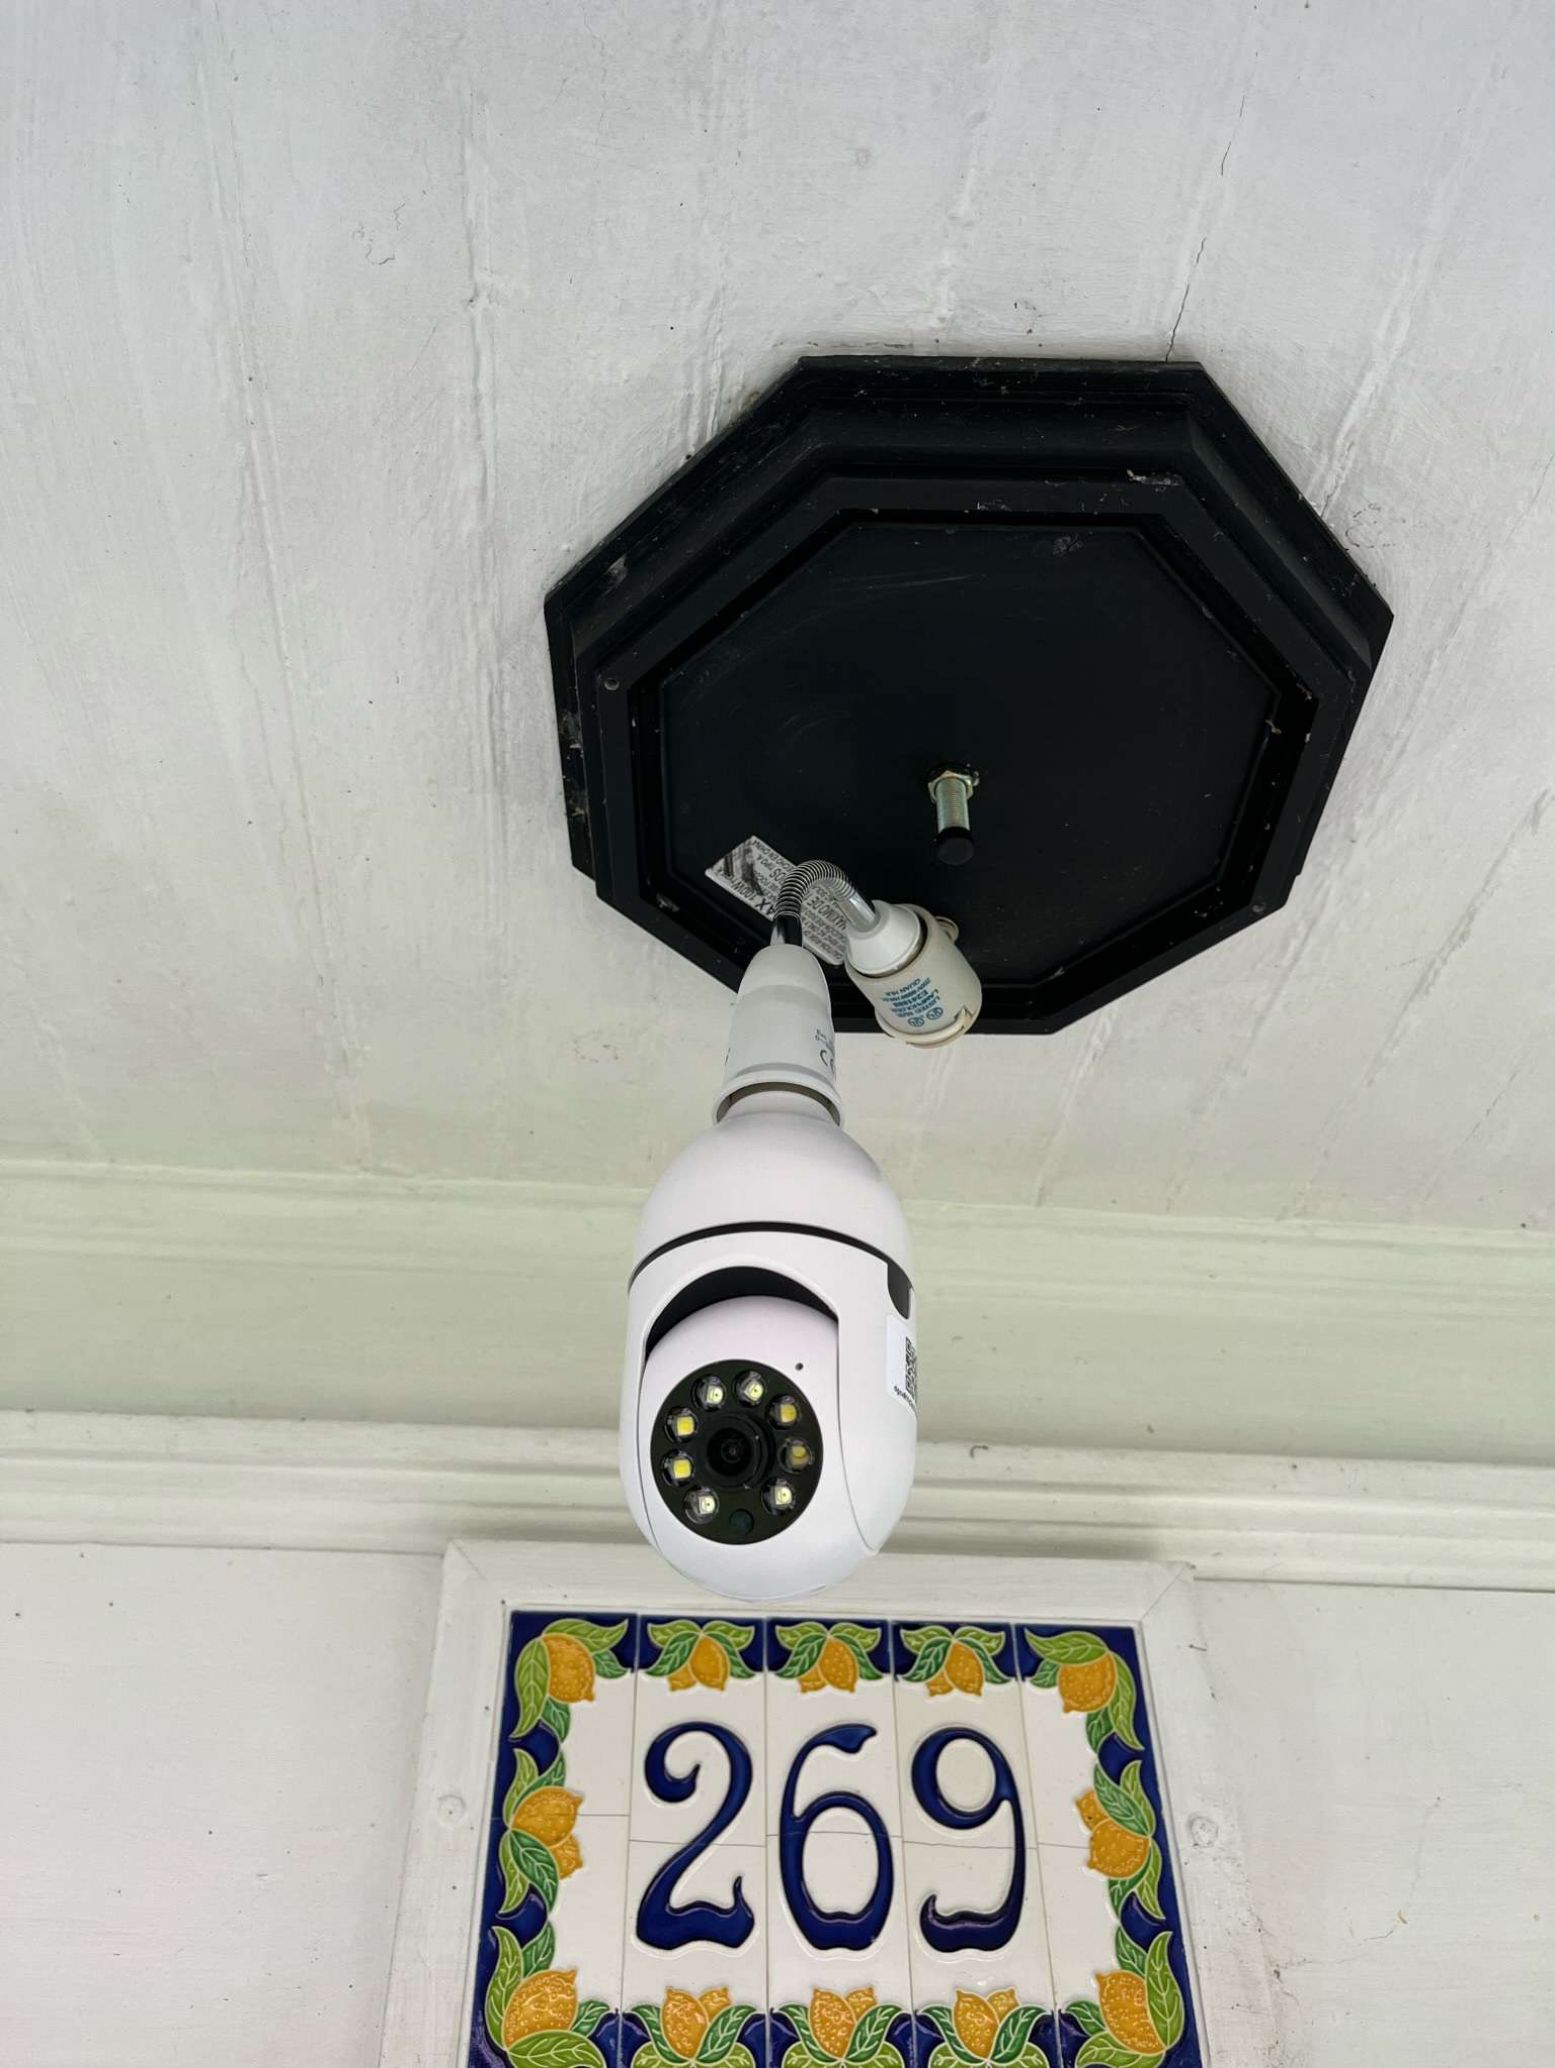 Customer Reviews Of Nomad Security Camera